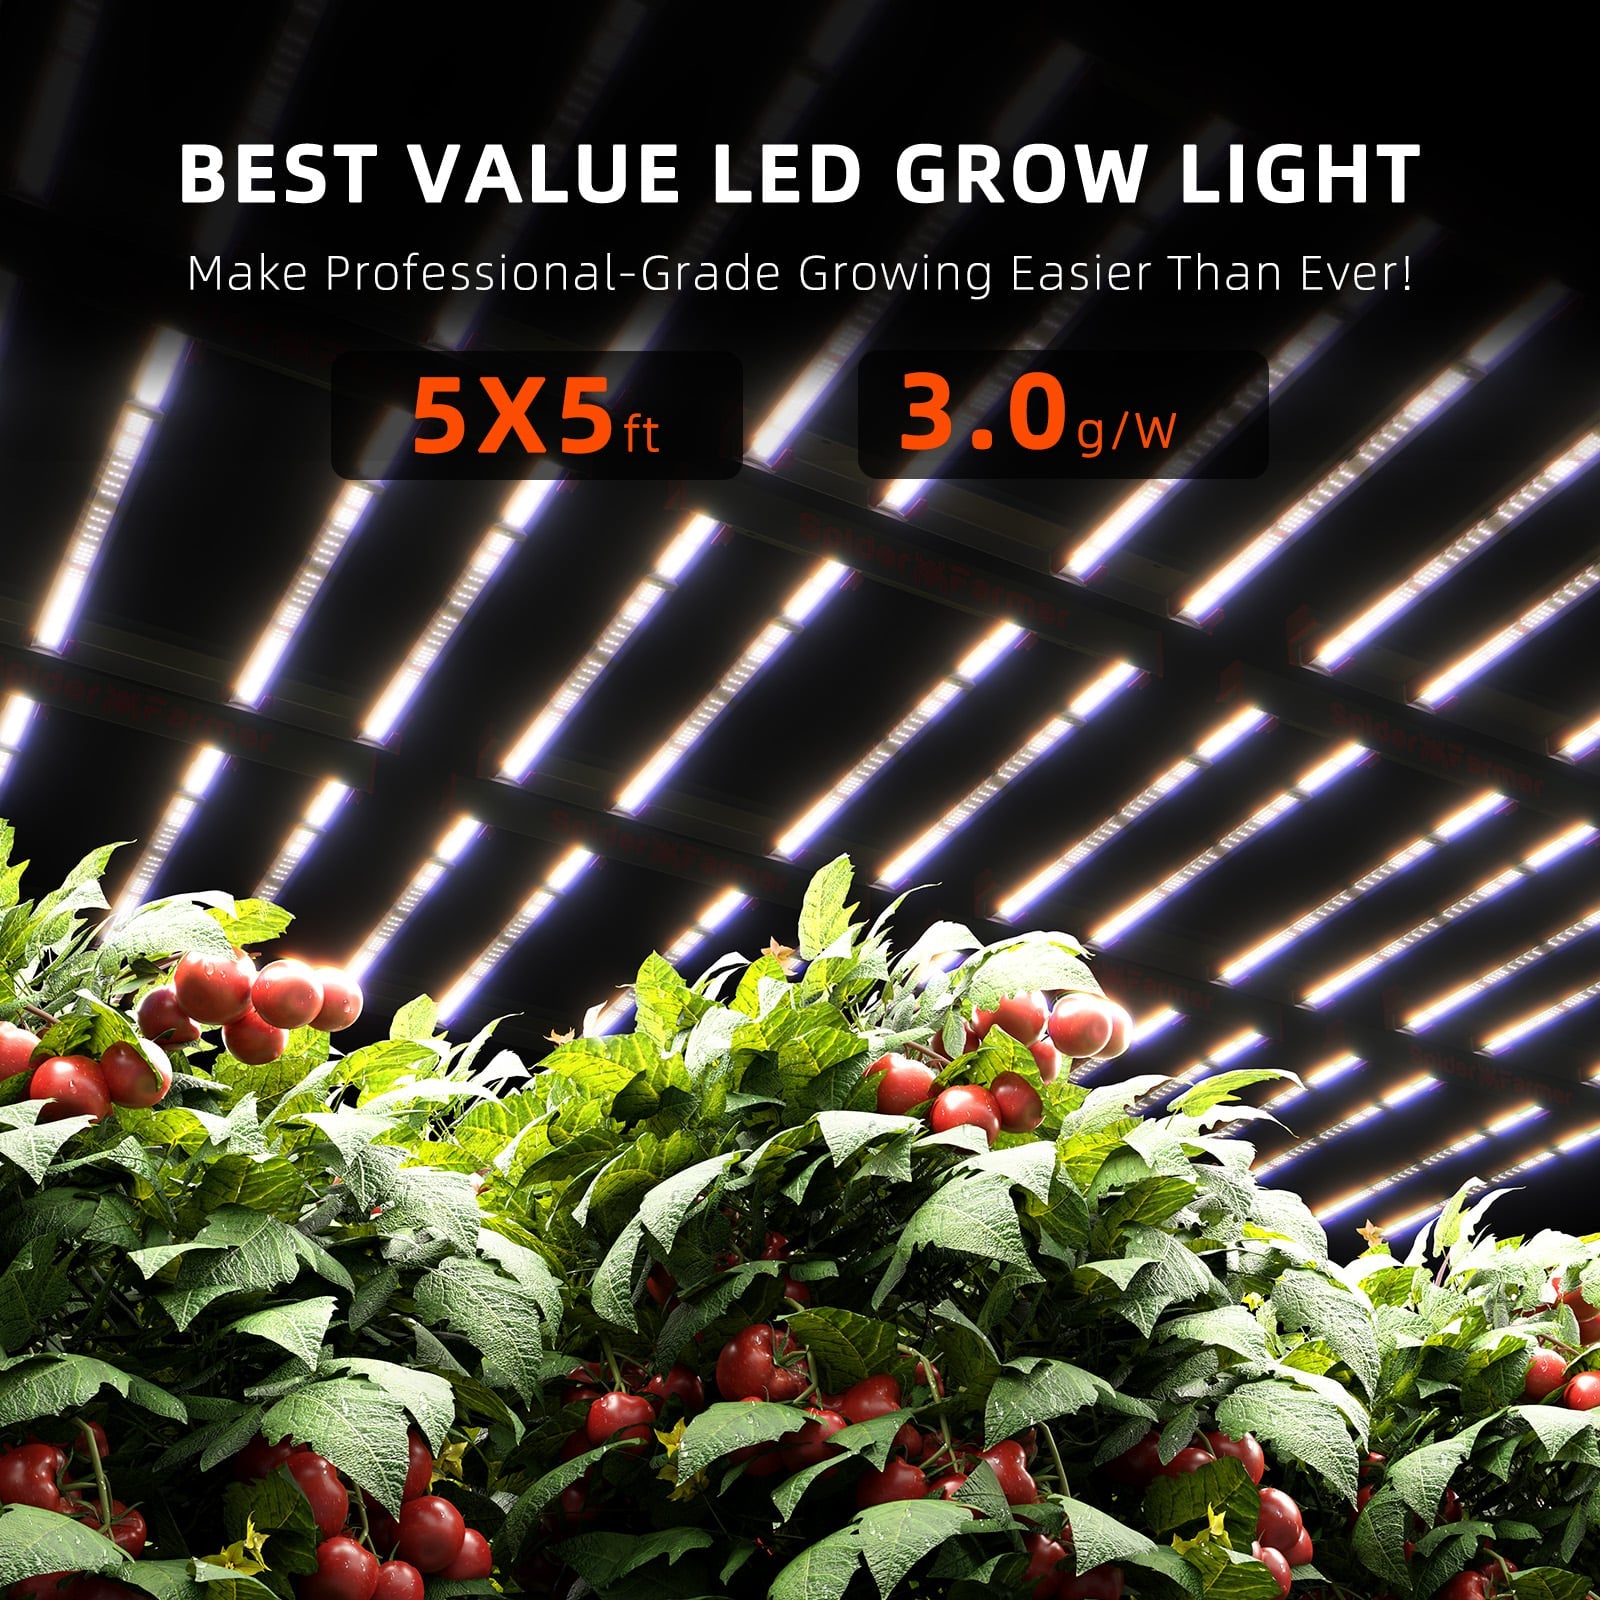 Spider Farmer® G1000W Dimmable Cost-effective Full Spectrum CO2 Commercial LED Grow Light